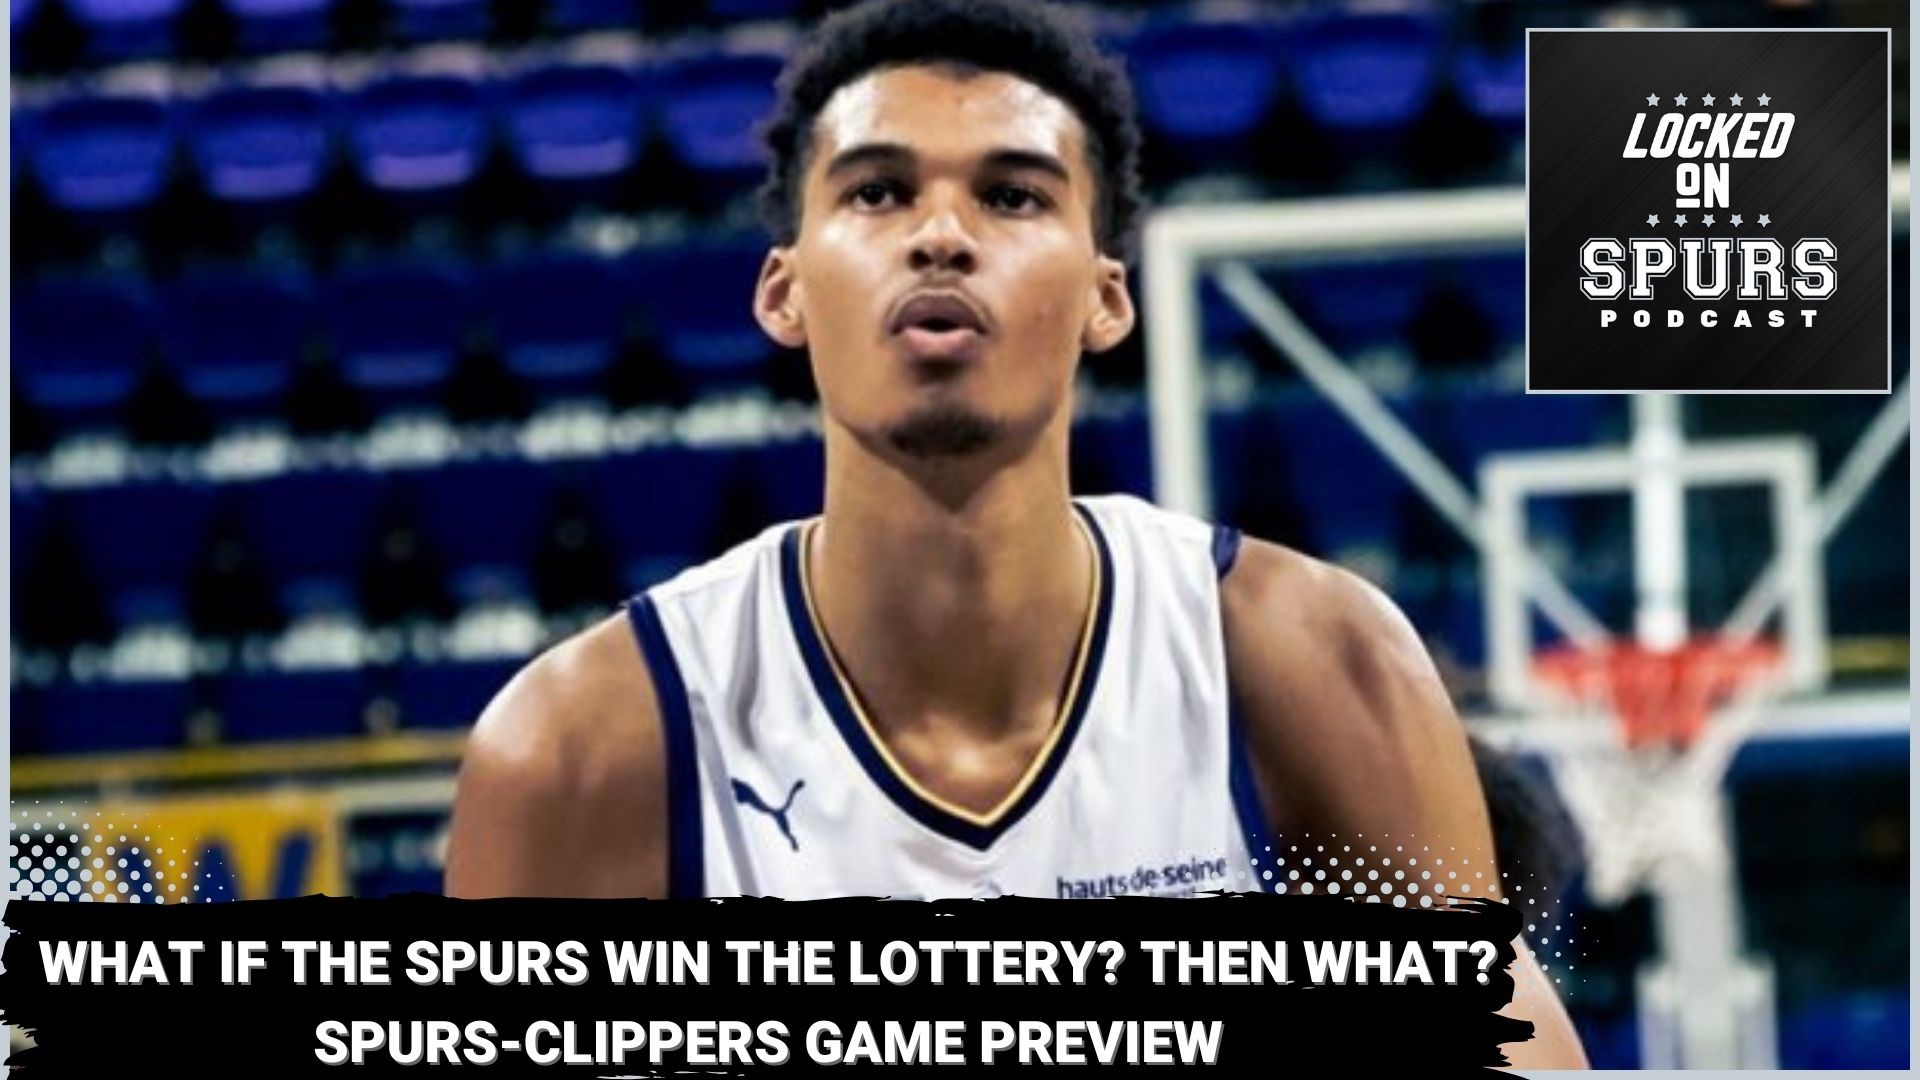 Just how long will the Spurs' rebuild take if the team gets a top pick in the NBA Draft?